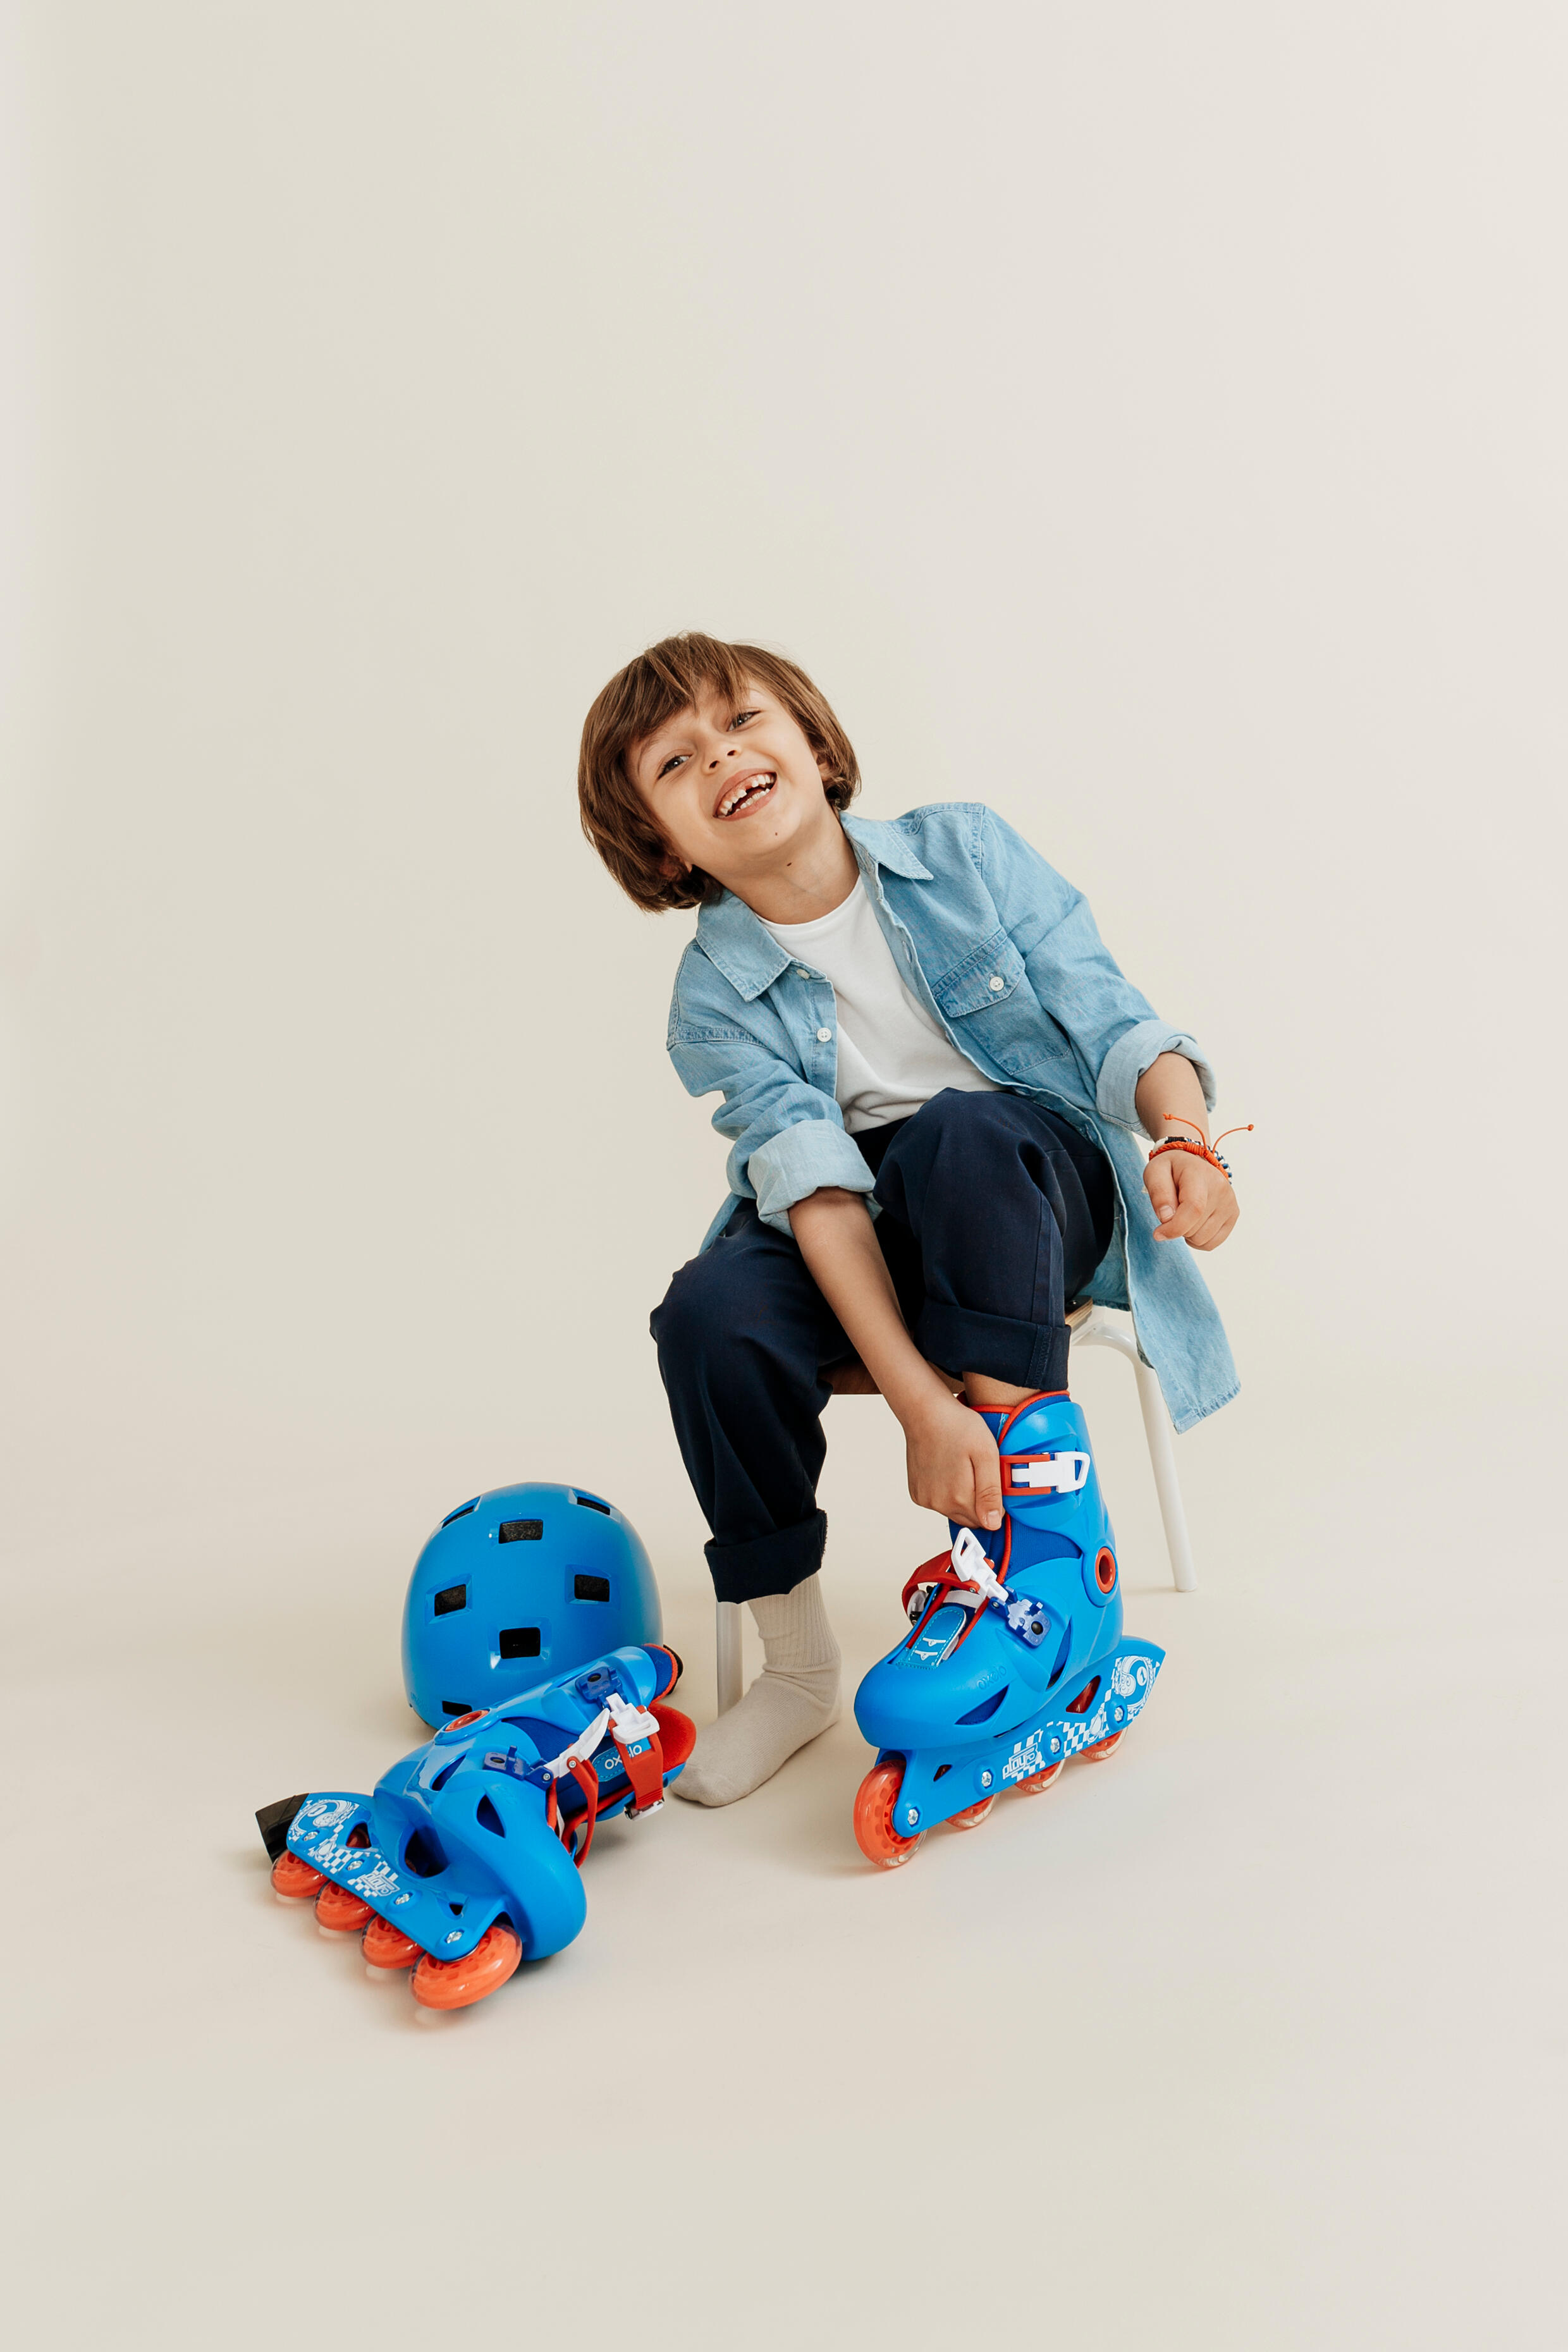 Kids' In-line Skates - Play 3 Blue/Red - OXELO